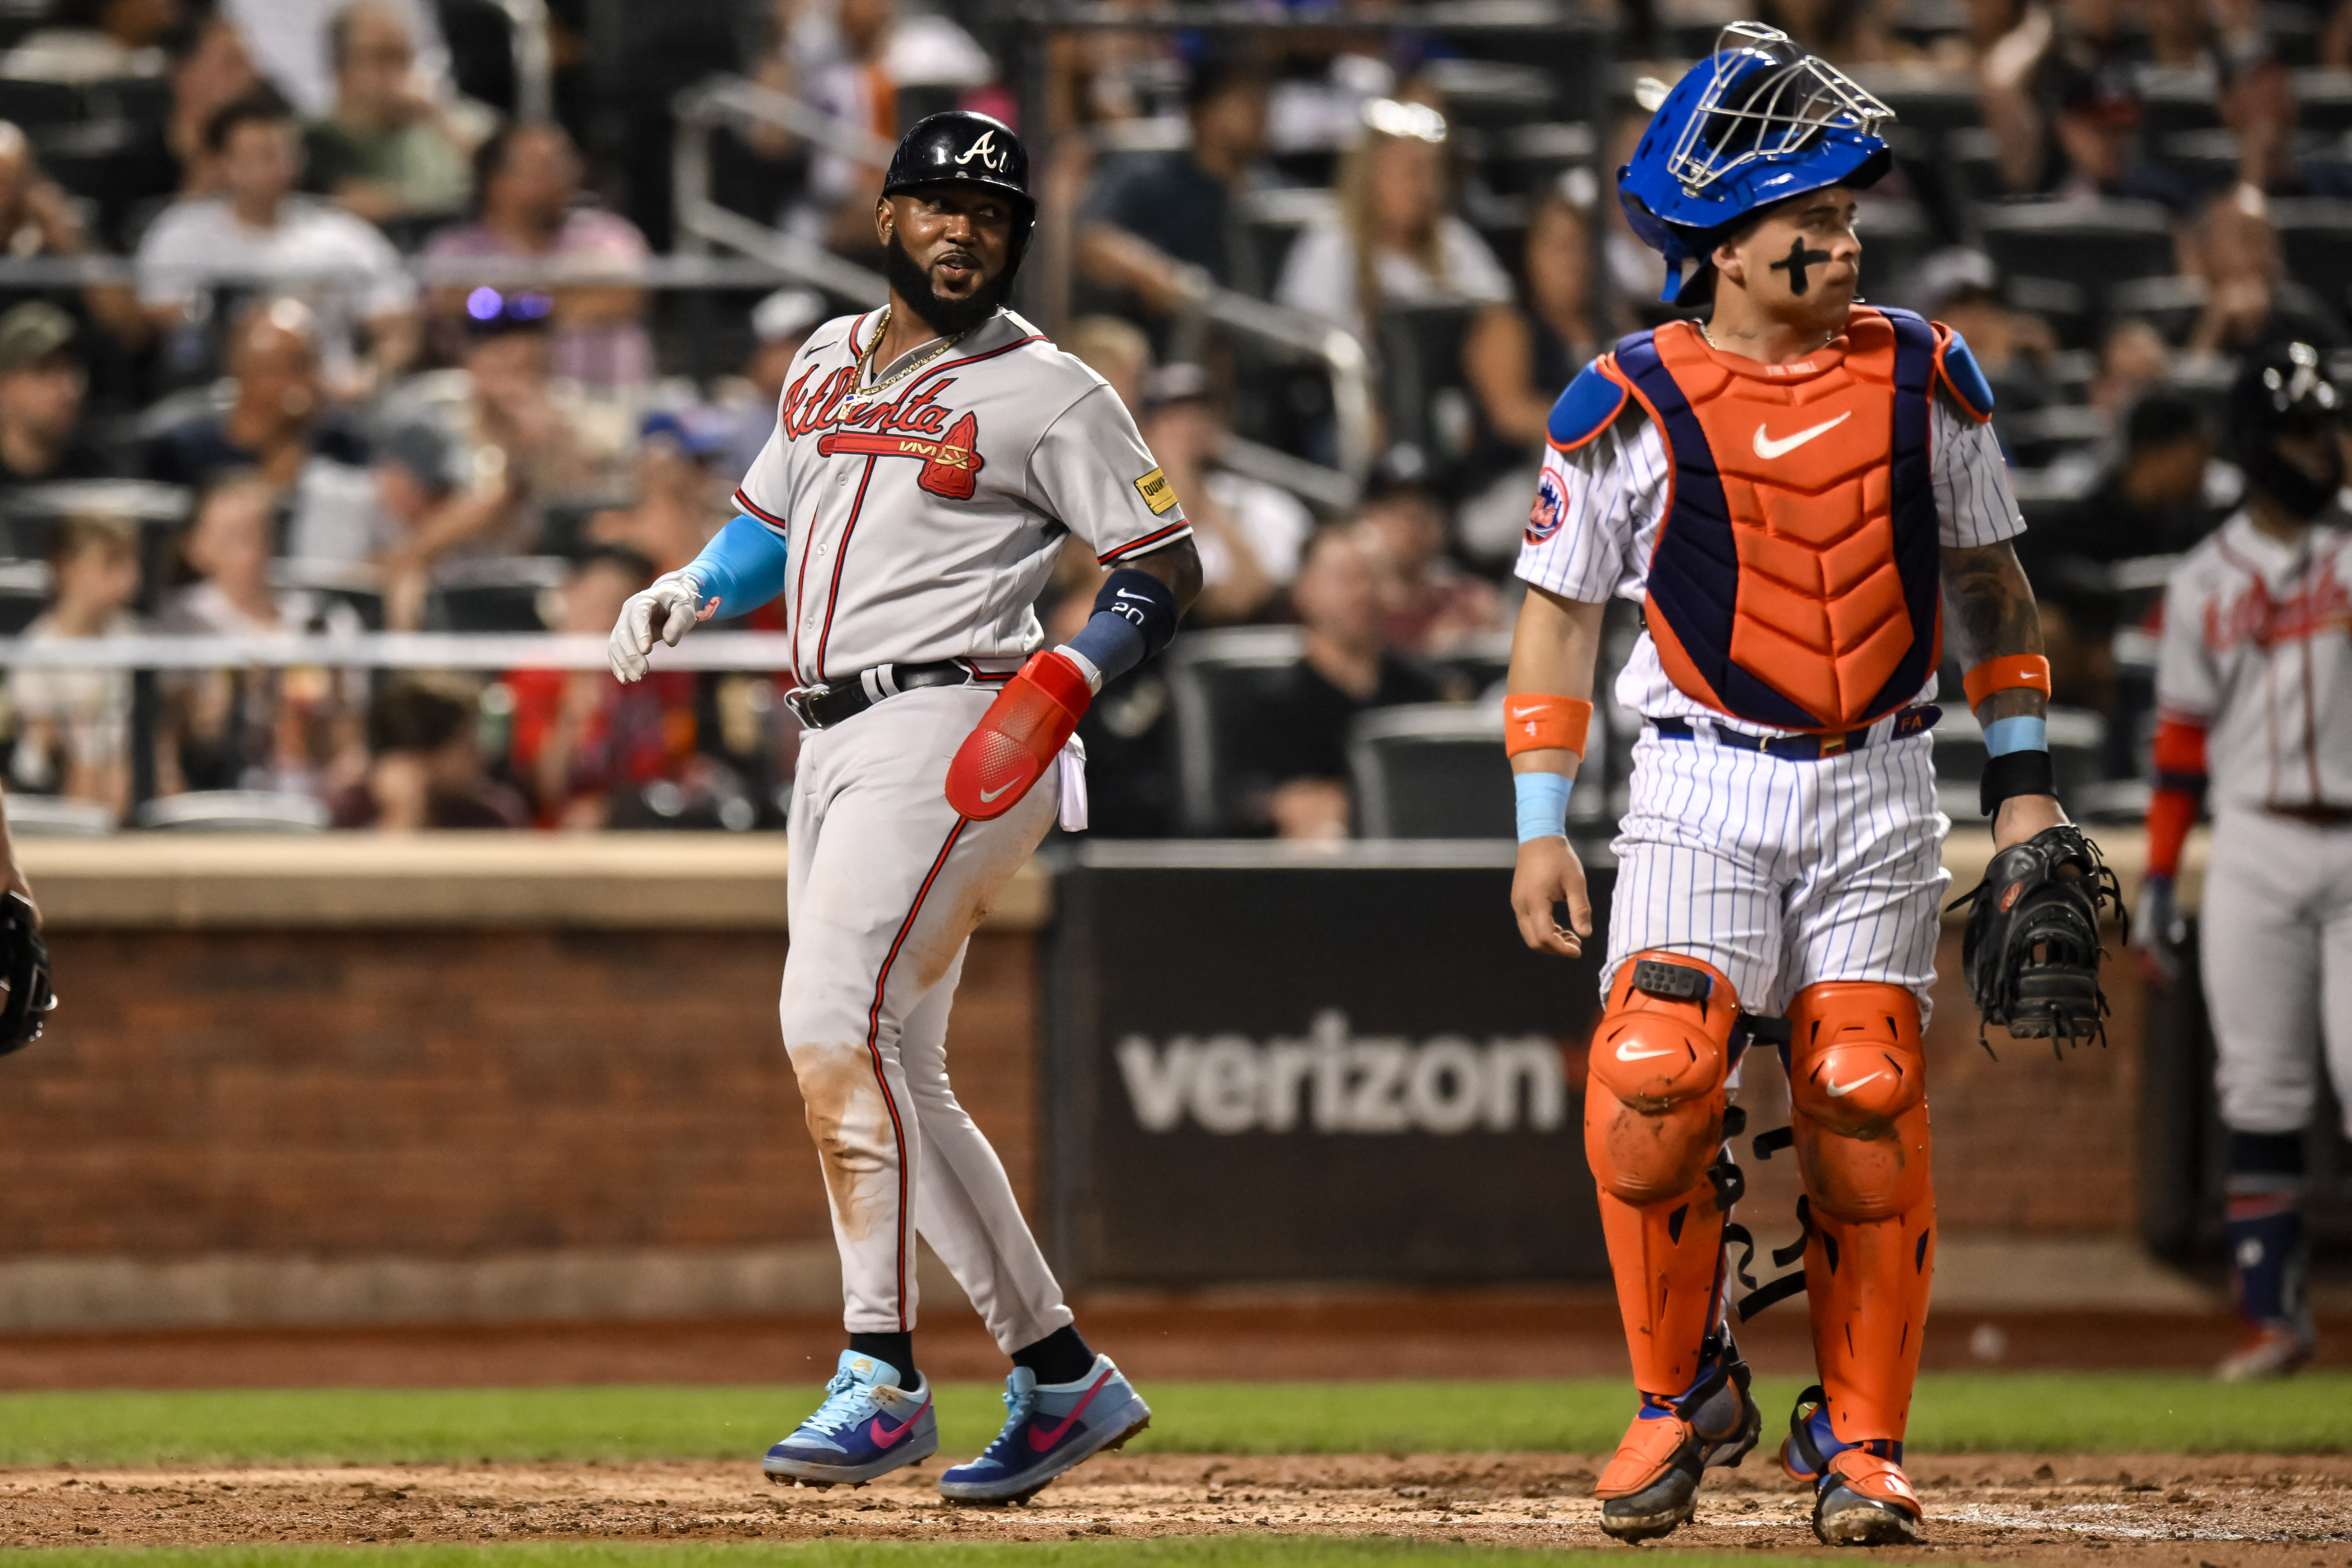 Braves Crush The Mets 8-2, But May Have Lost Hudson For Season